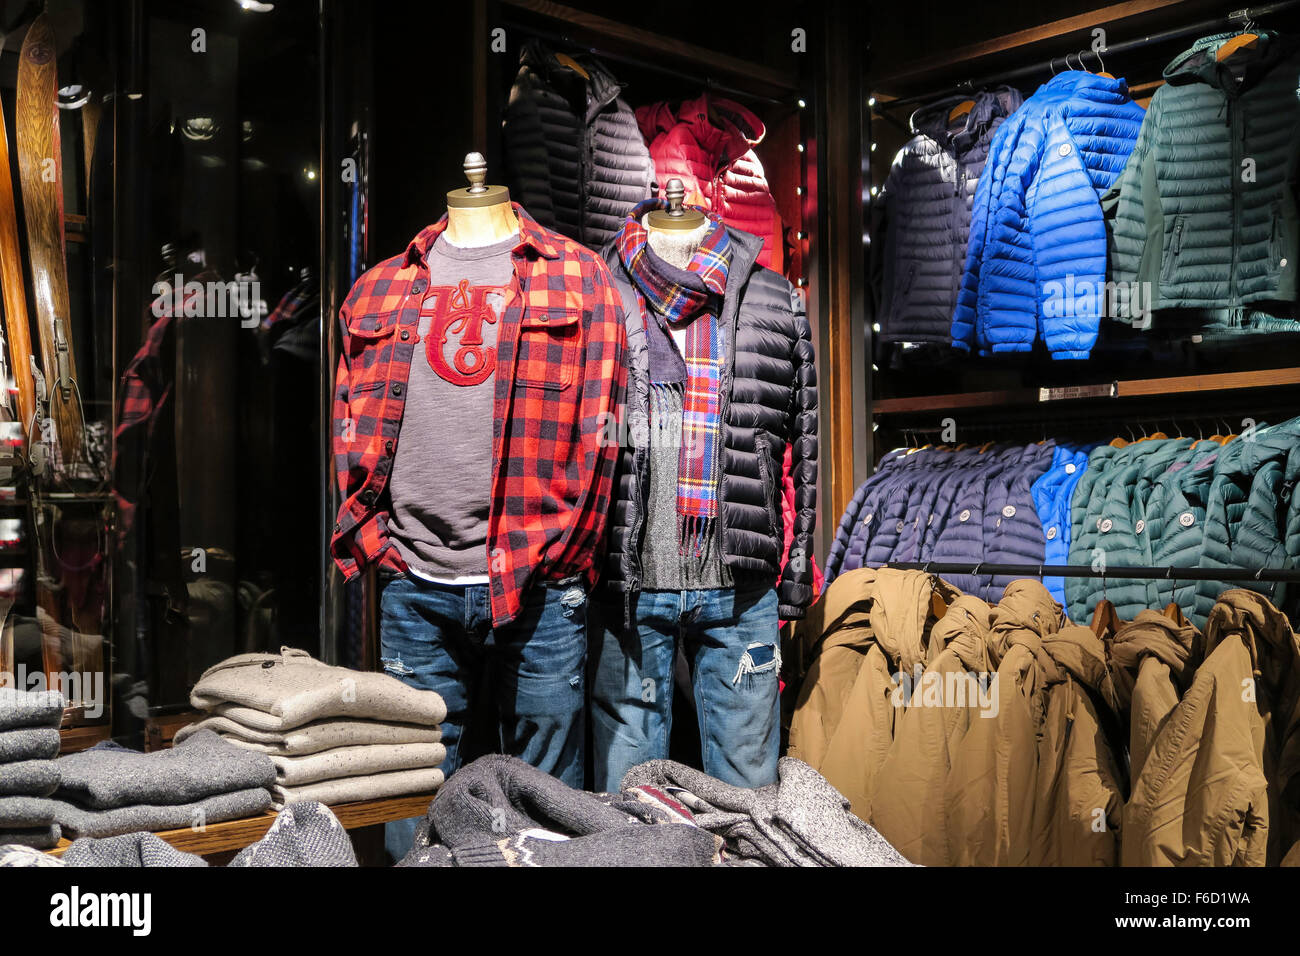 Abercrombie & Fitch Flagship Store Interior, Fifth Avenue, NYC Stock ...